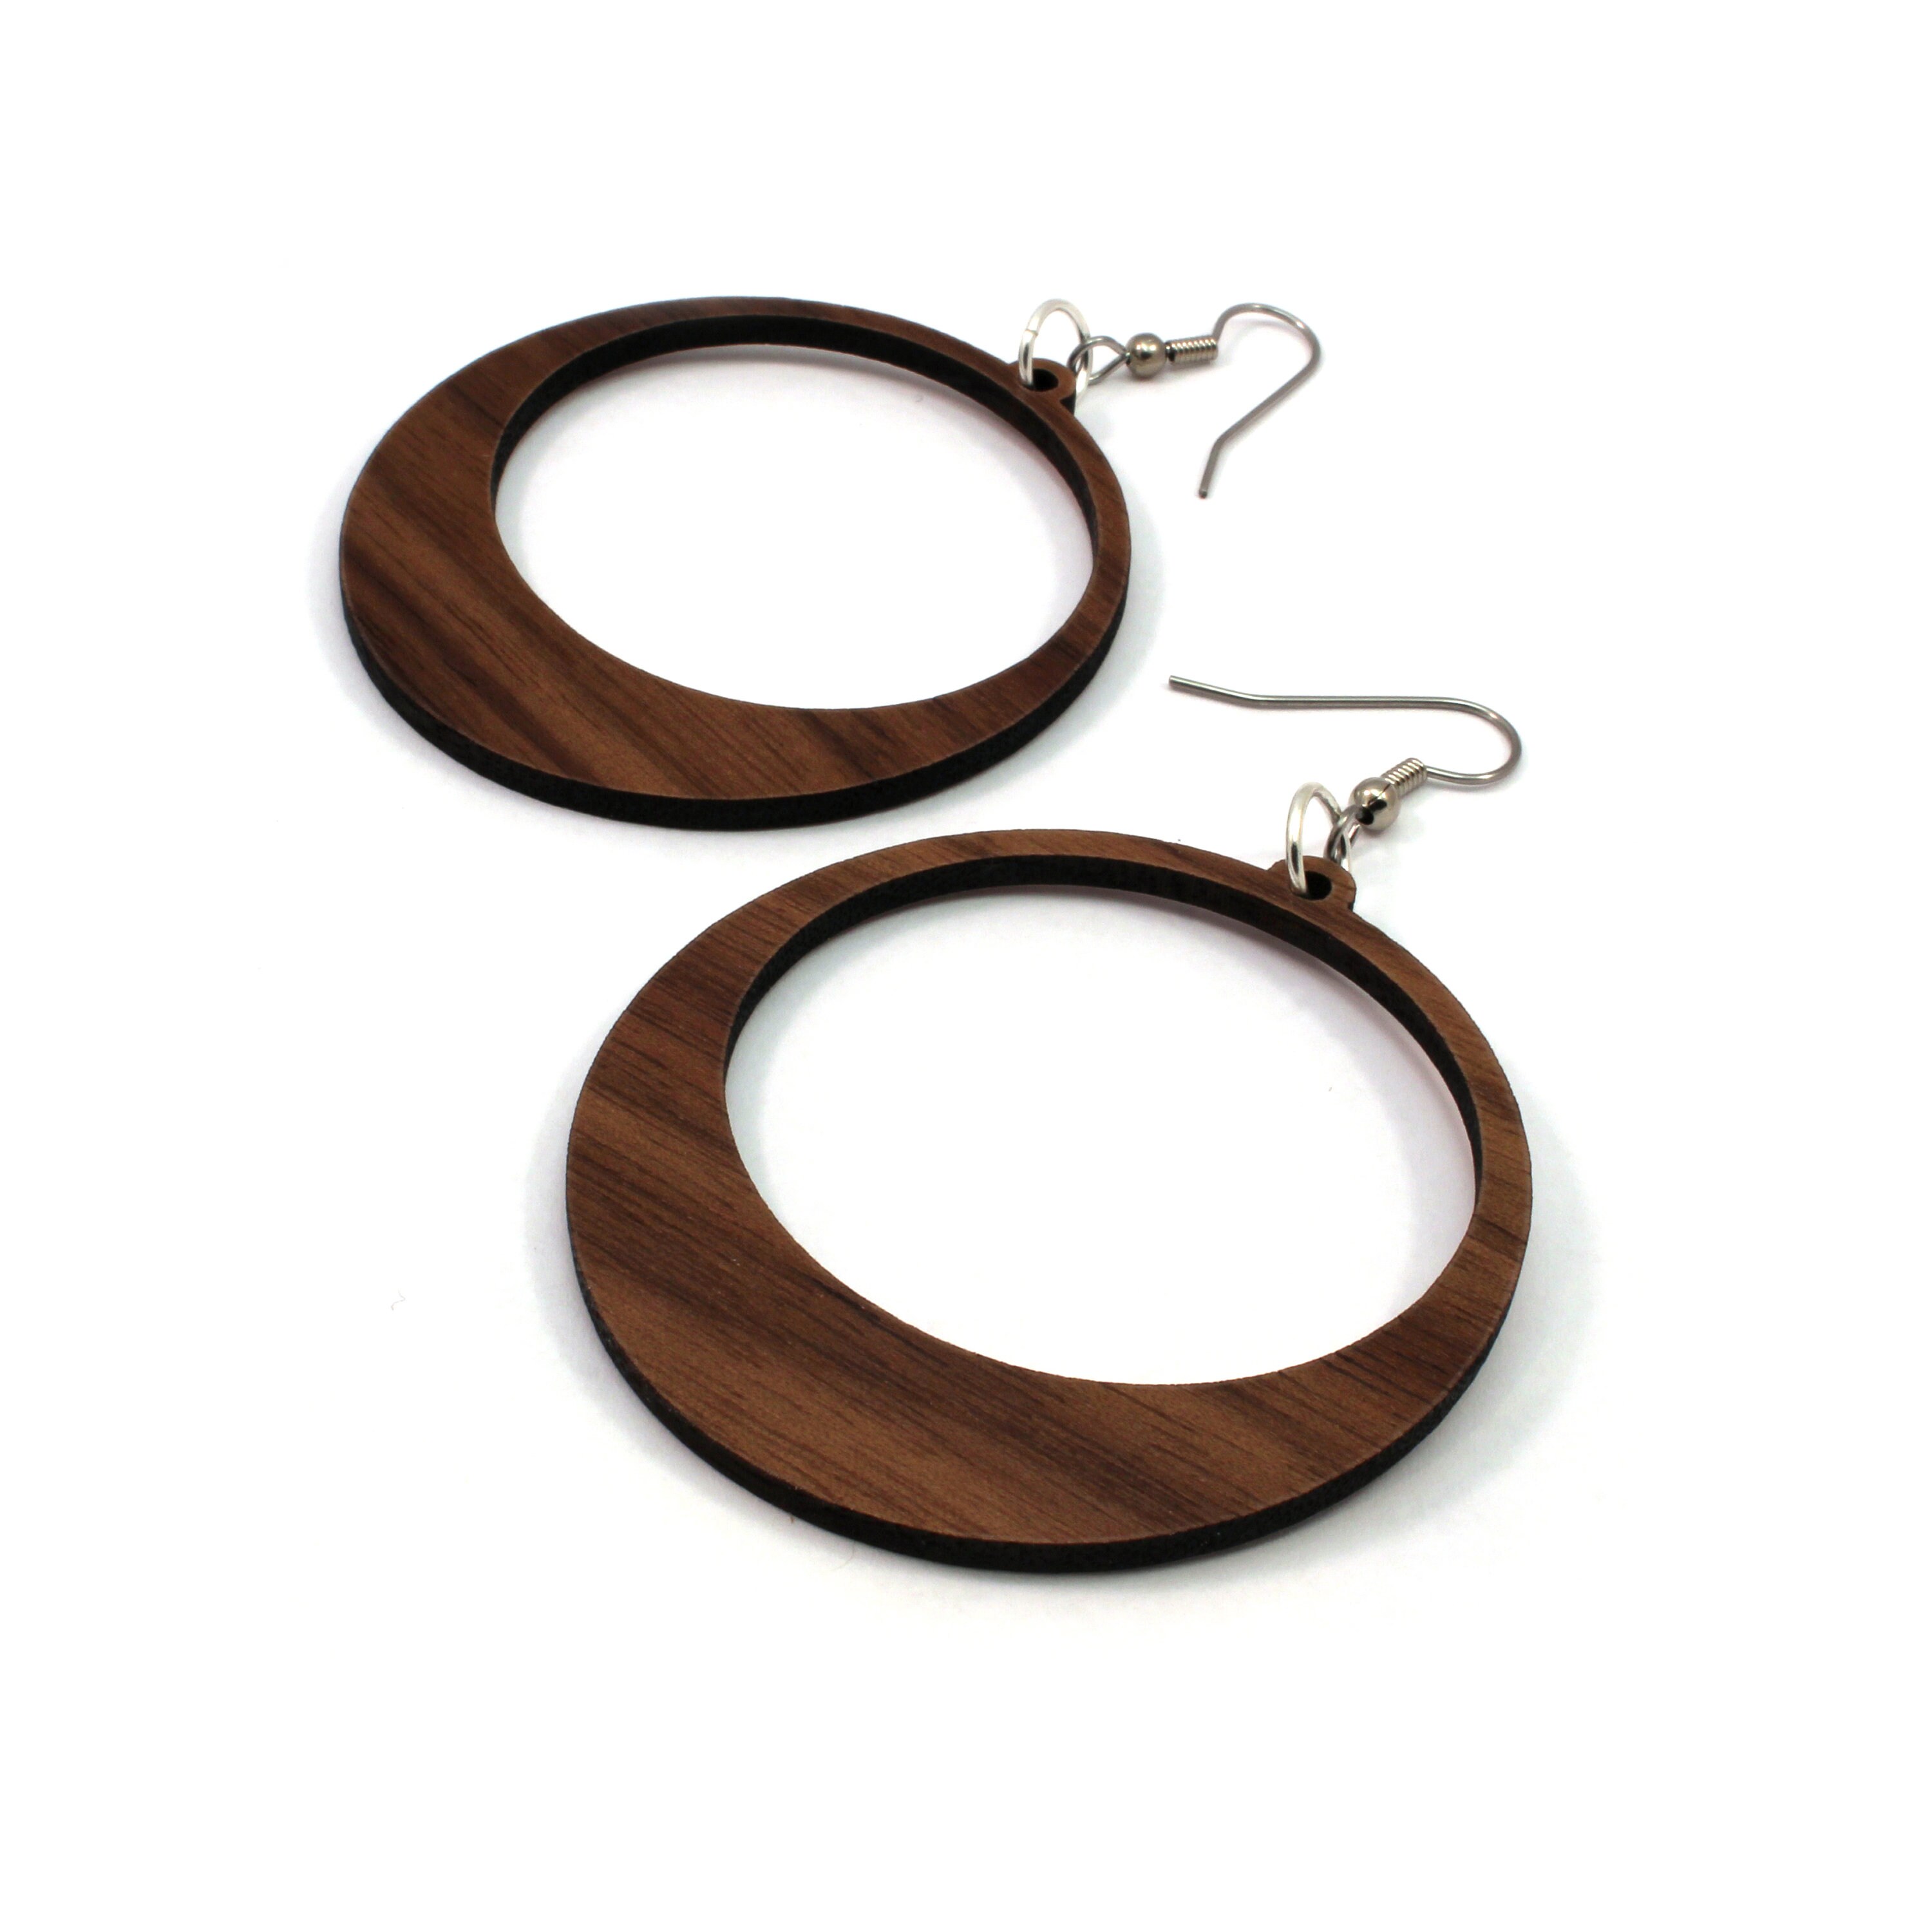 Sustainable Wooden Hook Earrings Hoops Pack of 2 Size  2Inch Wood Dangle Earrings For Women Sustainably Harvested Walnut